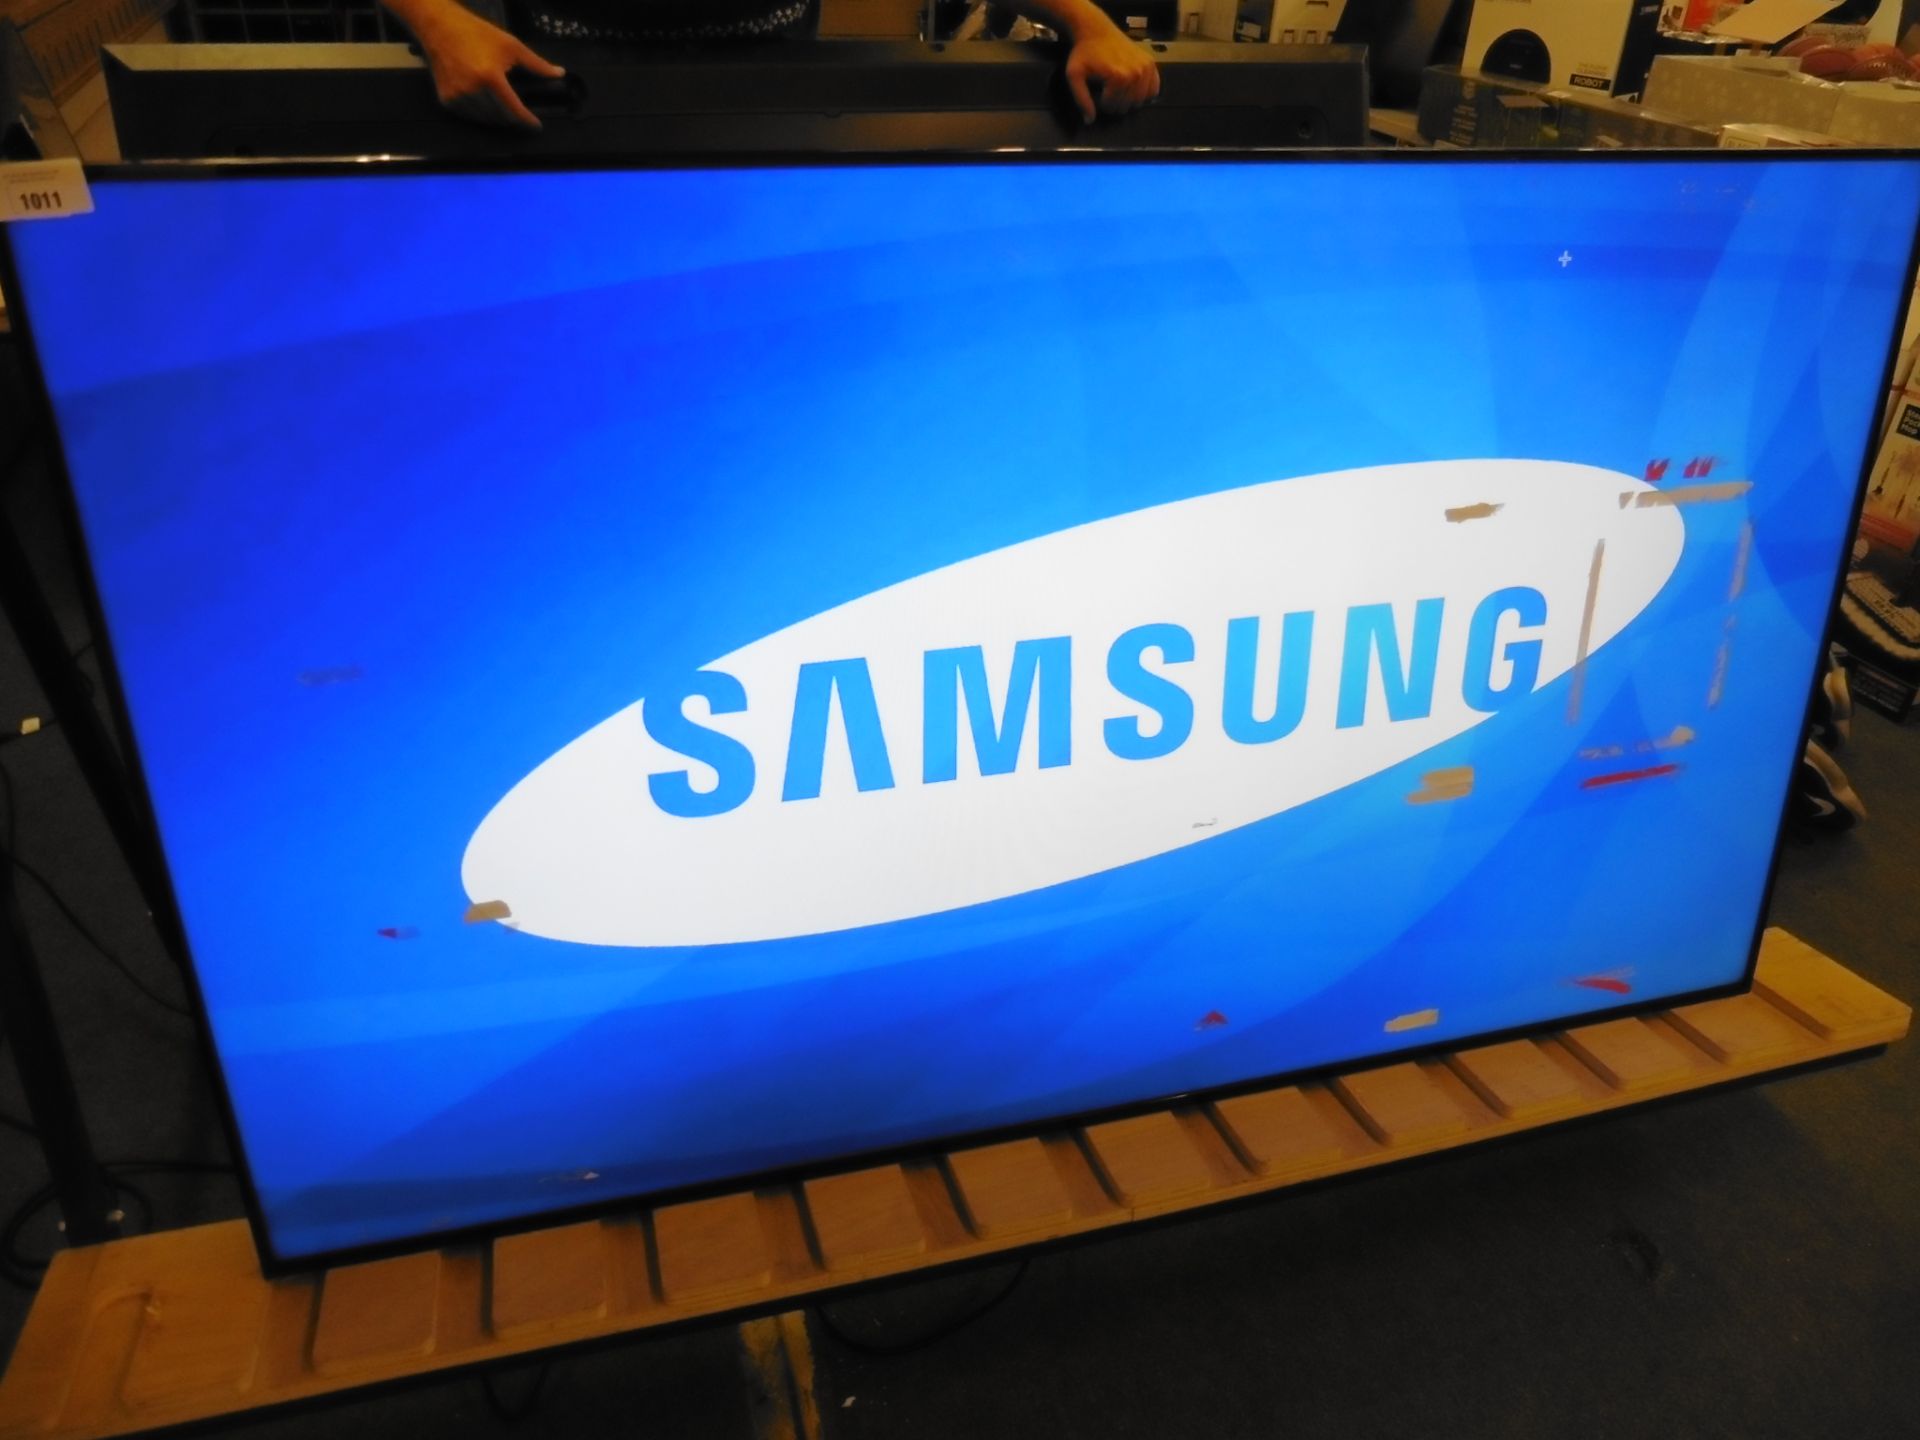 Samsung model LH75DMD professional display screen with remote (manufactured 2015, sticky tape on